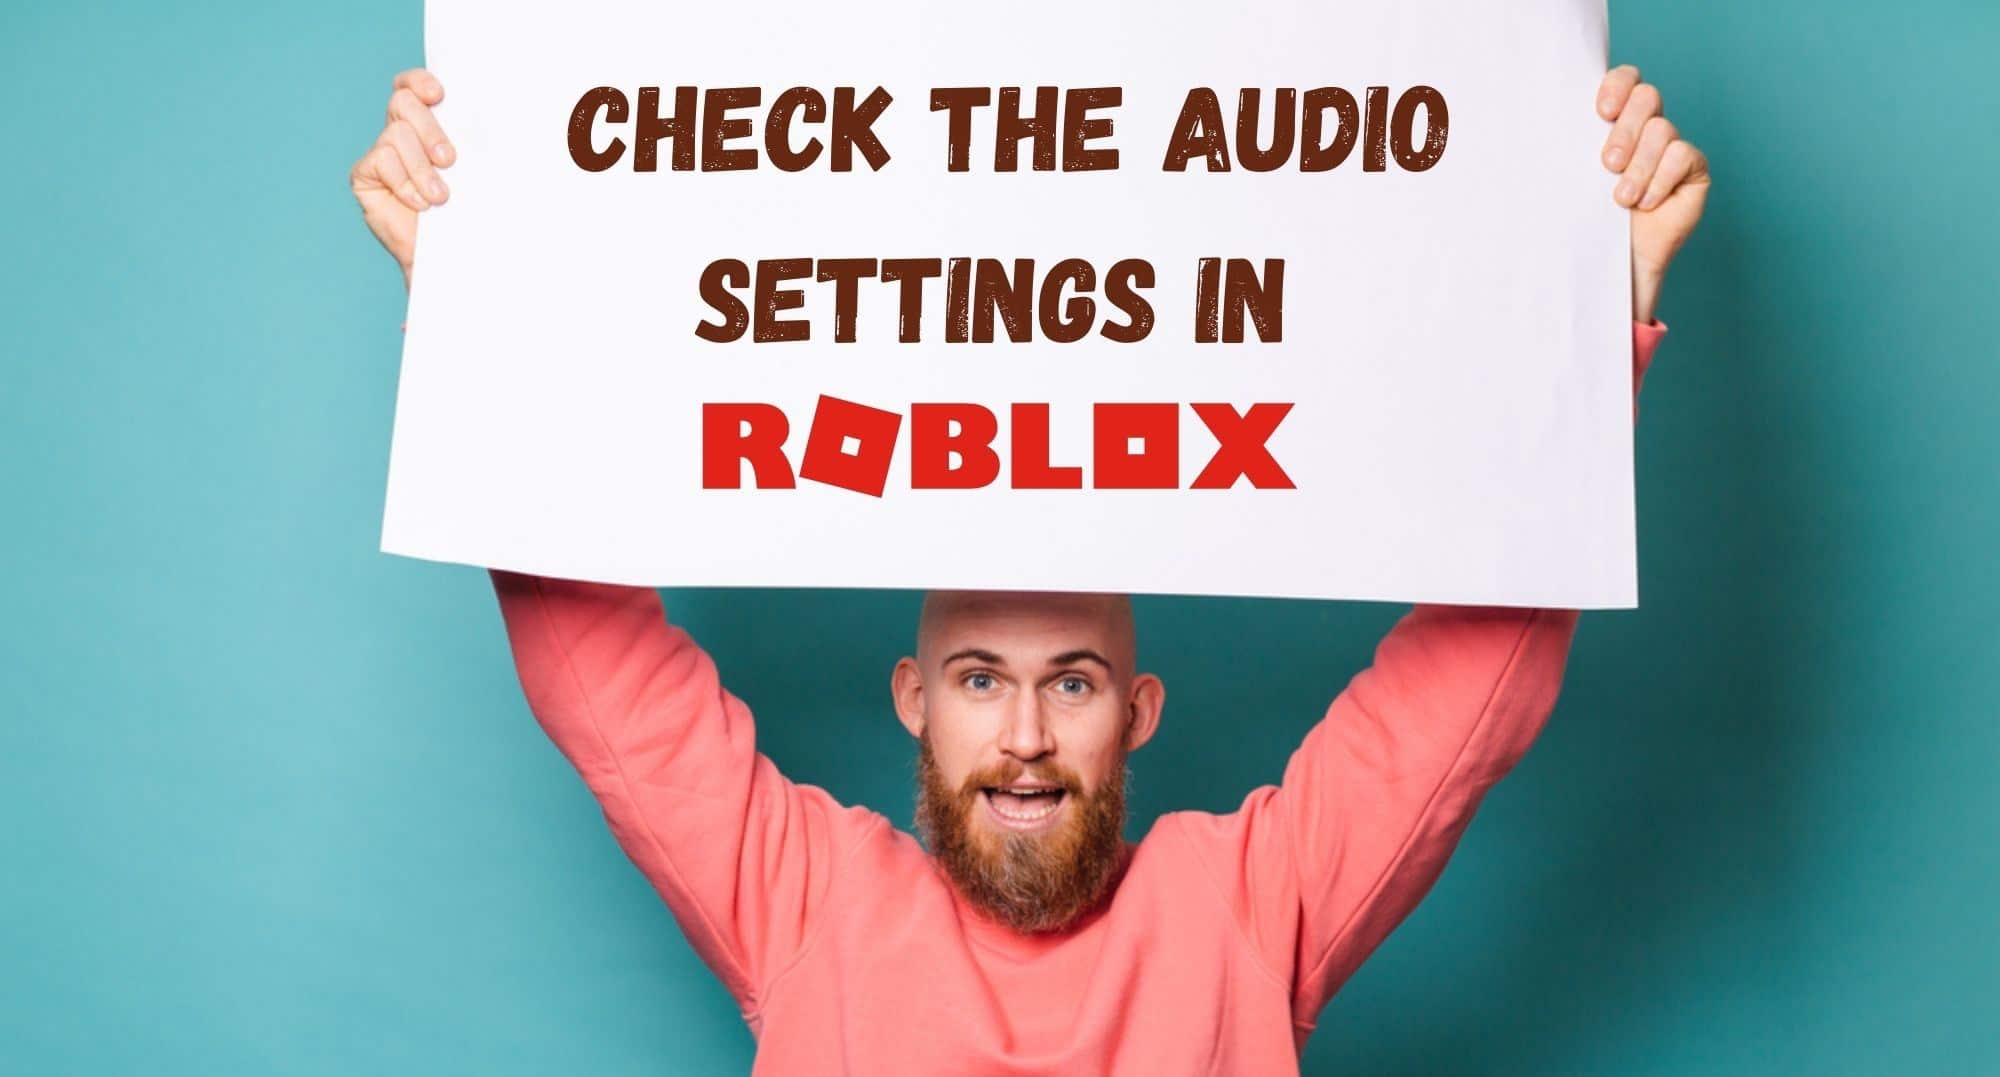 Check the Audio Settings in Roblox